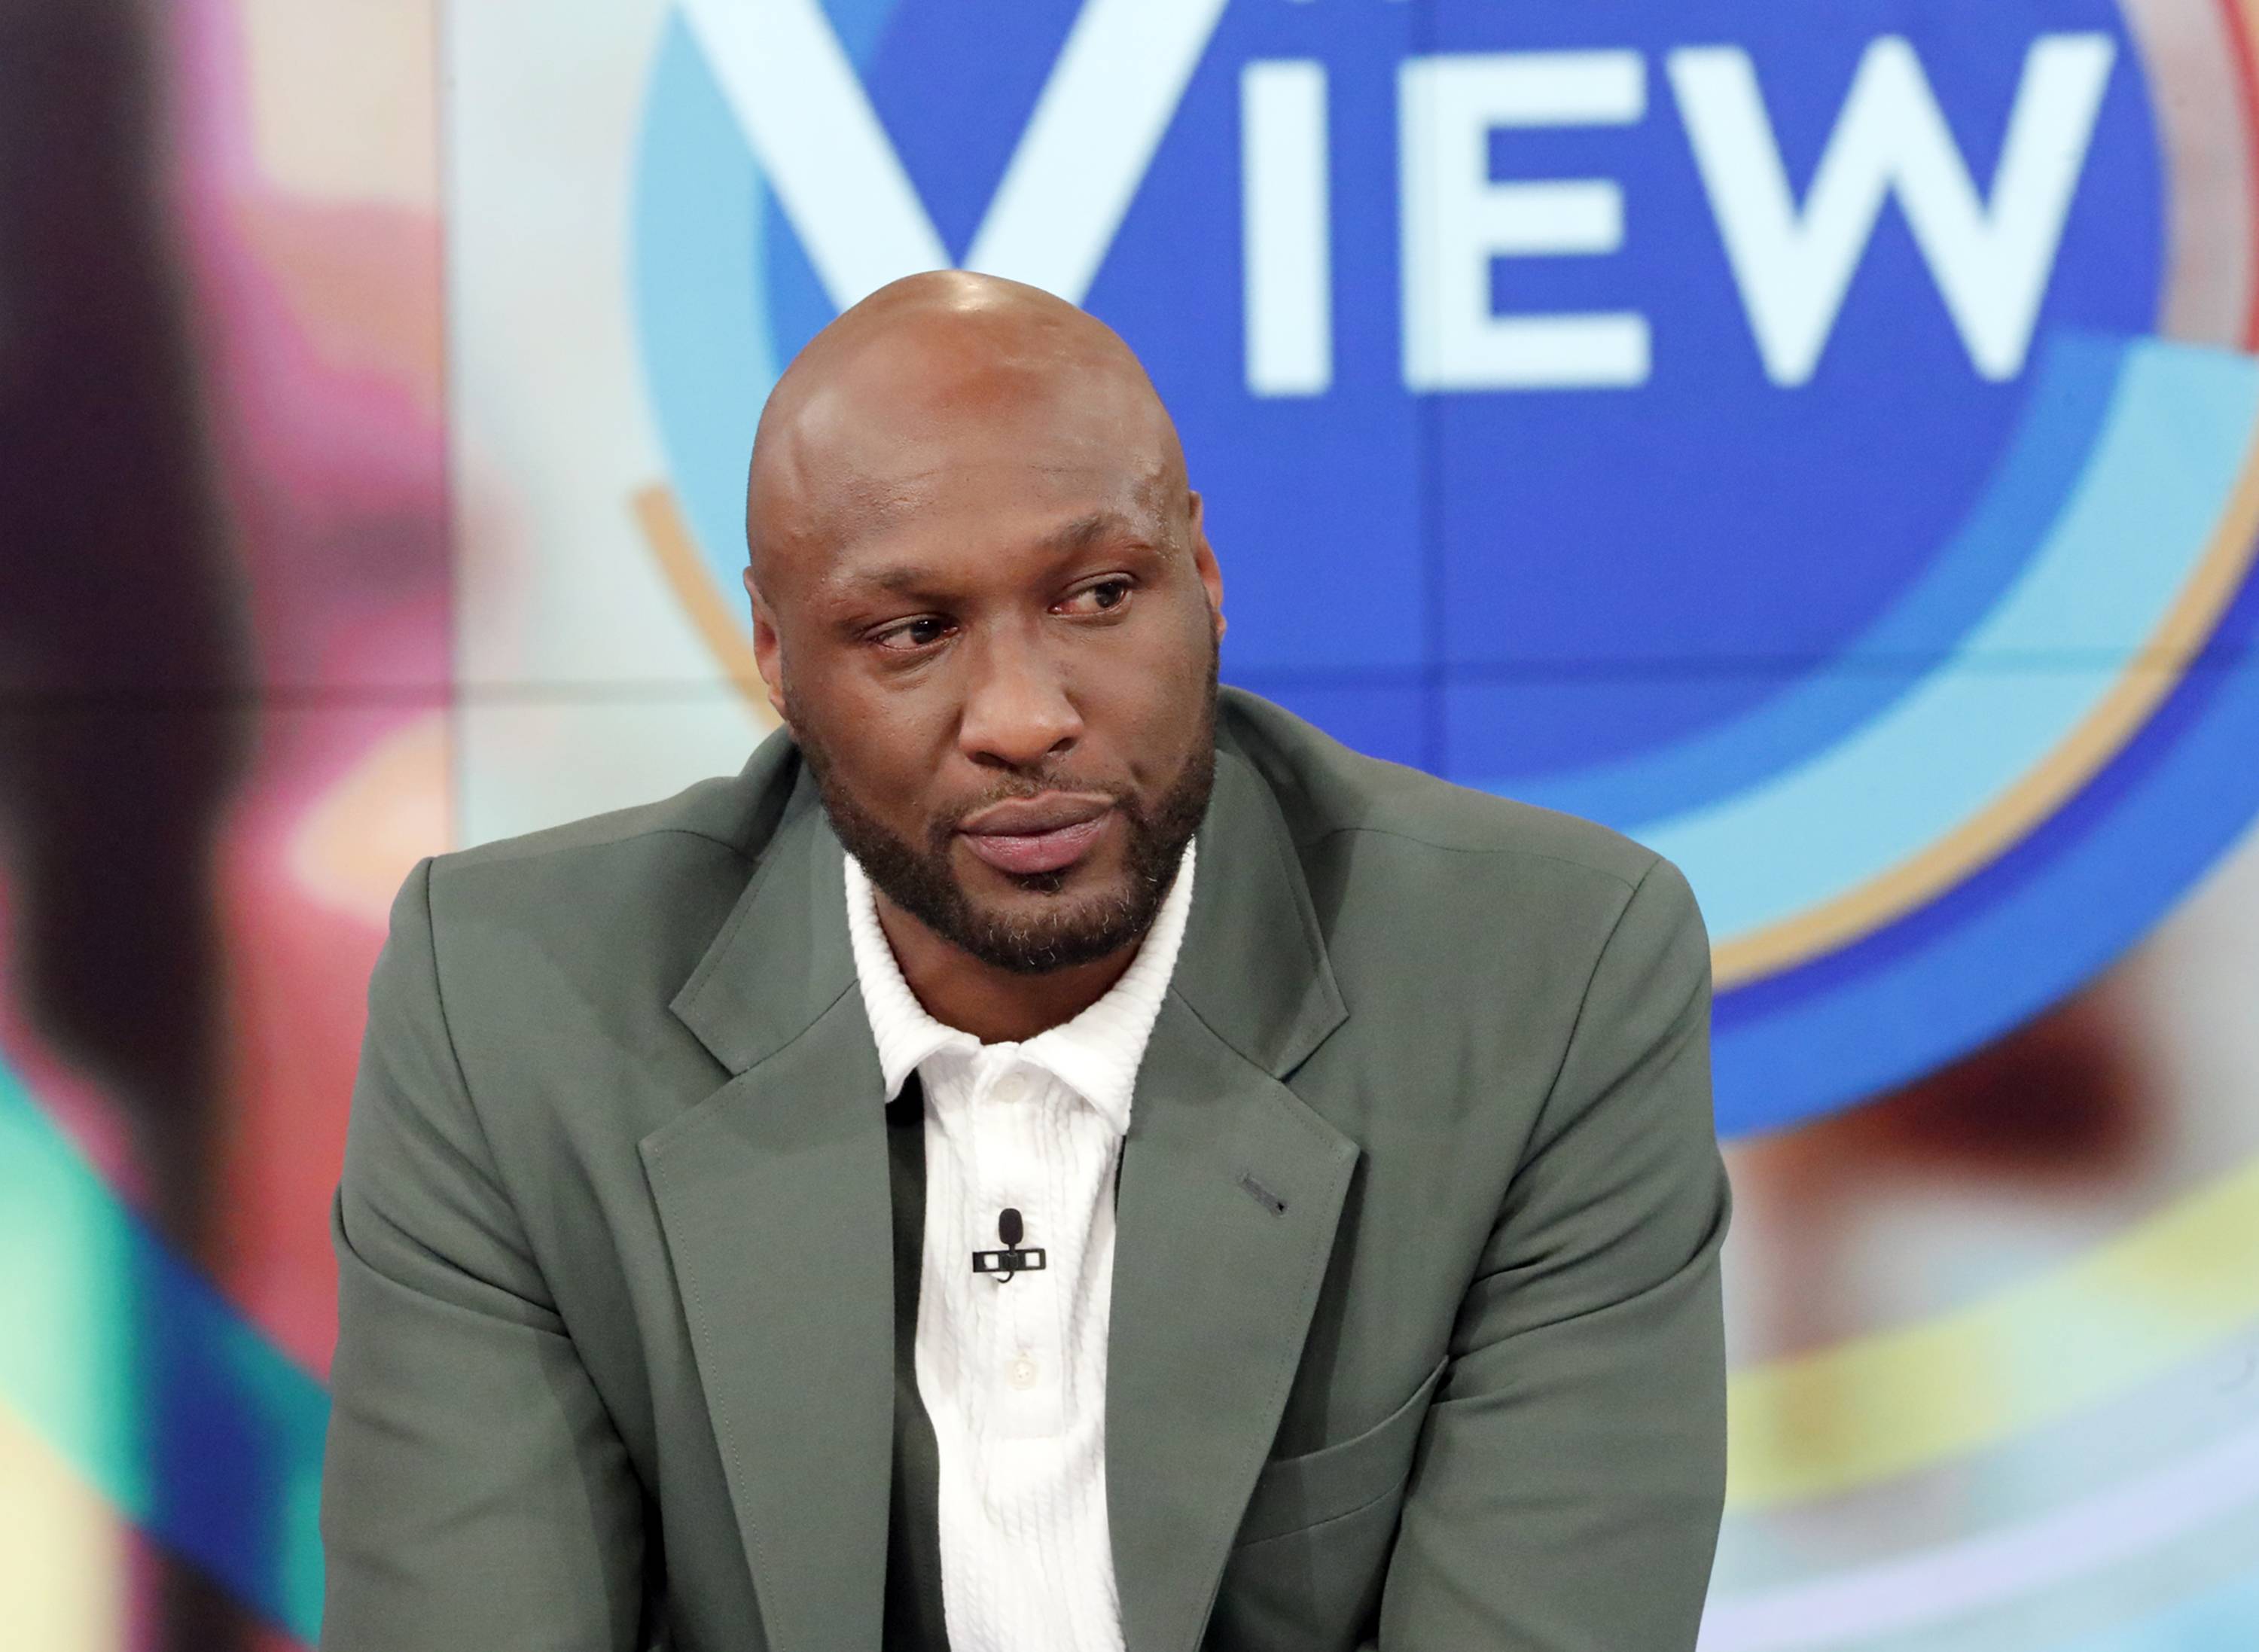 THE VIEW - Lamar Odom appears on Walt Disney Television via Getty Images's "The View" today, Tuesday, 5/28/19.  "The View" airs Monday-Friday, 11am-12pm, ET on Walt Disney Television via Getty Images.     
(Photo by Lou Rocco/Walt Disney Television via Getty Images)
LAMAR ODOM